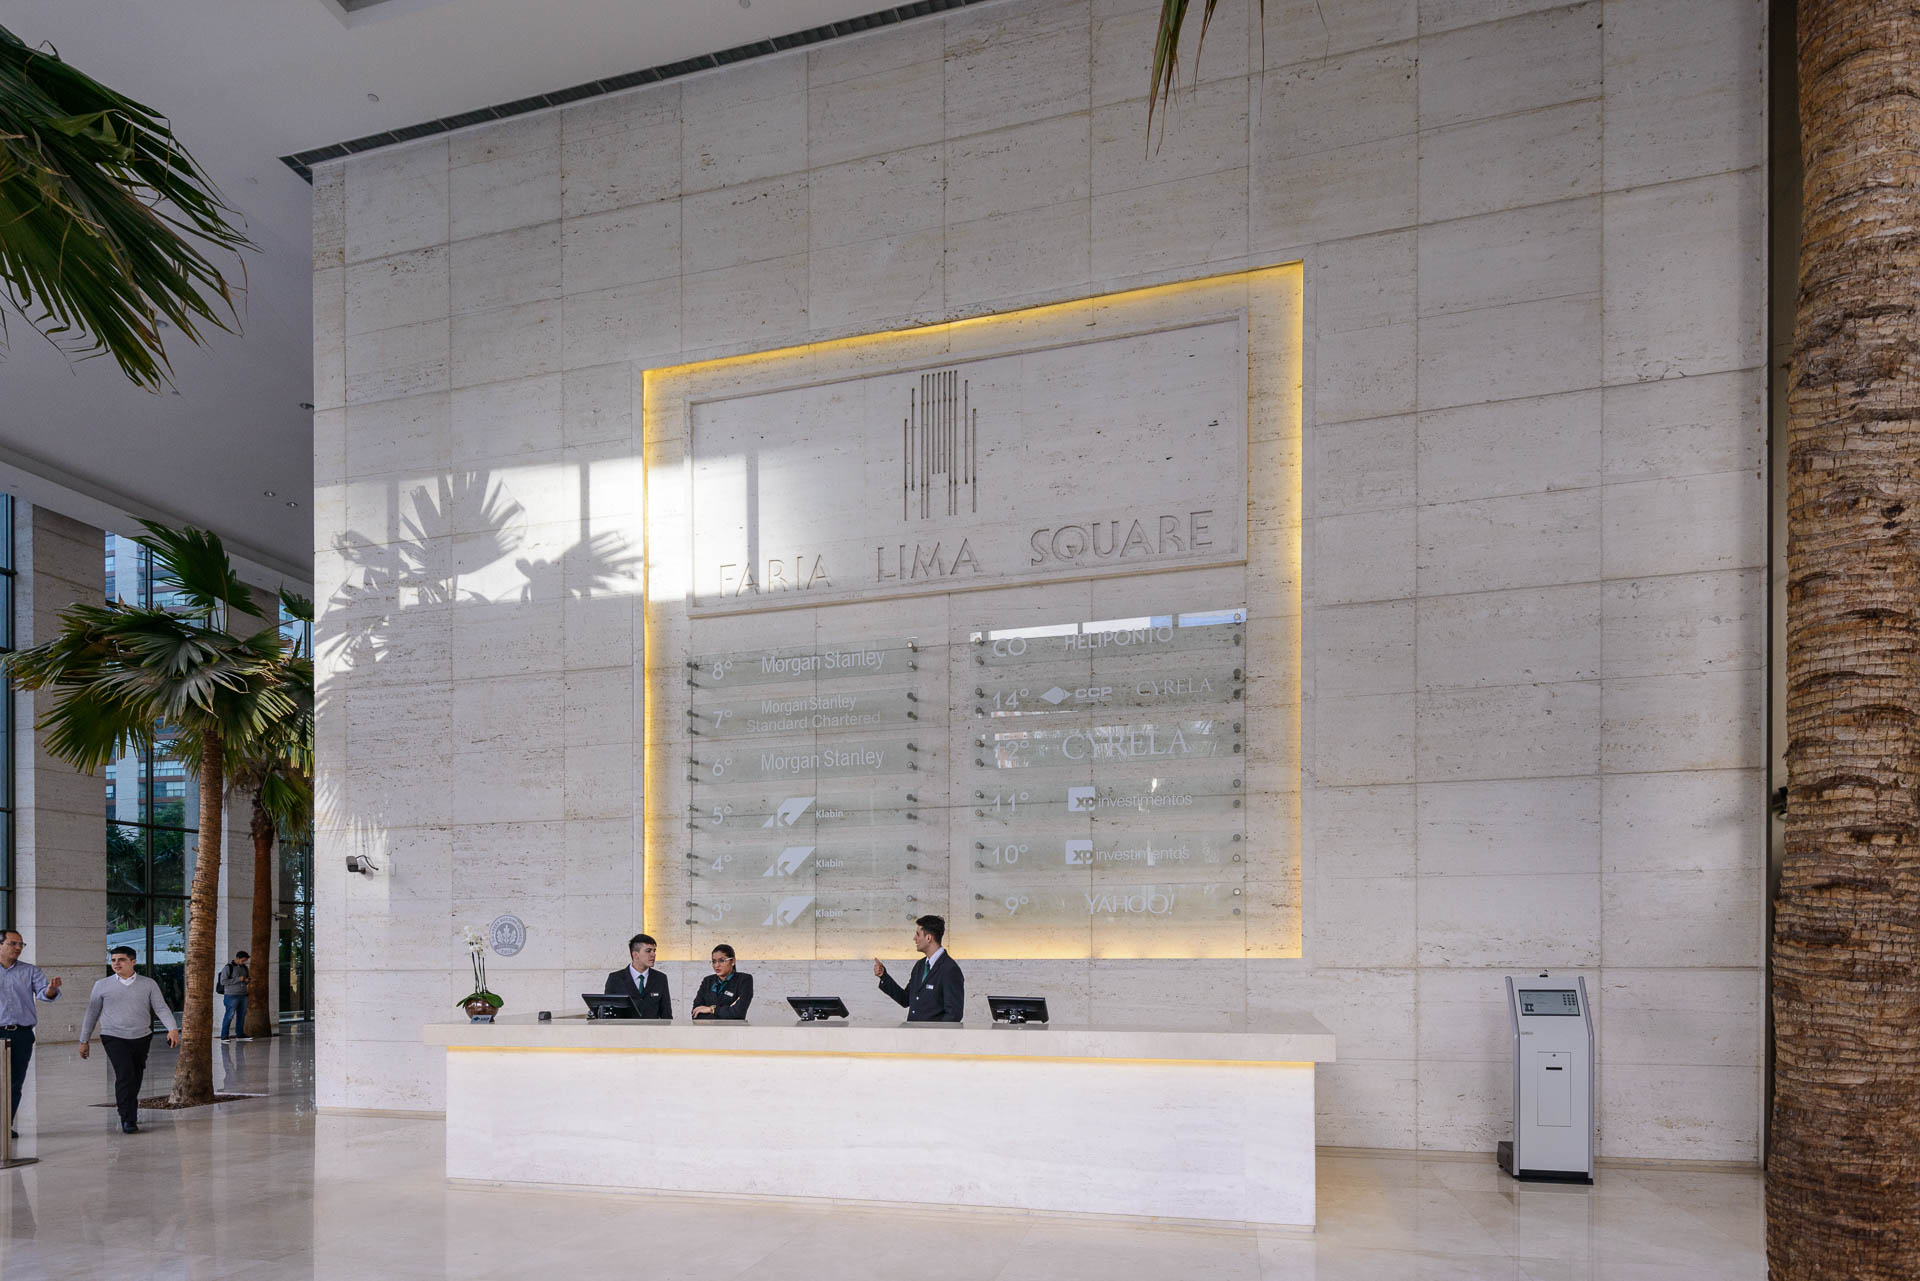 Faria Lima Square reception with 3 individuals behind the reception area